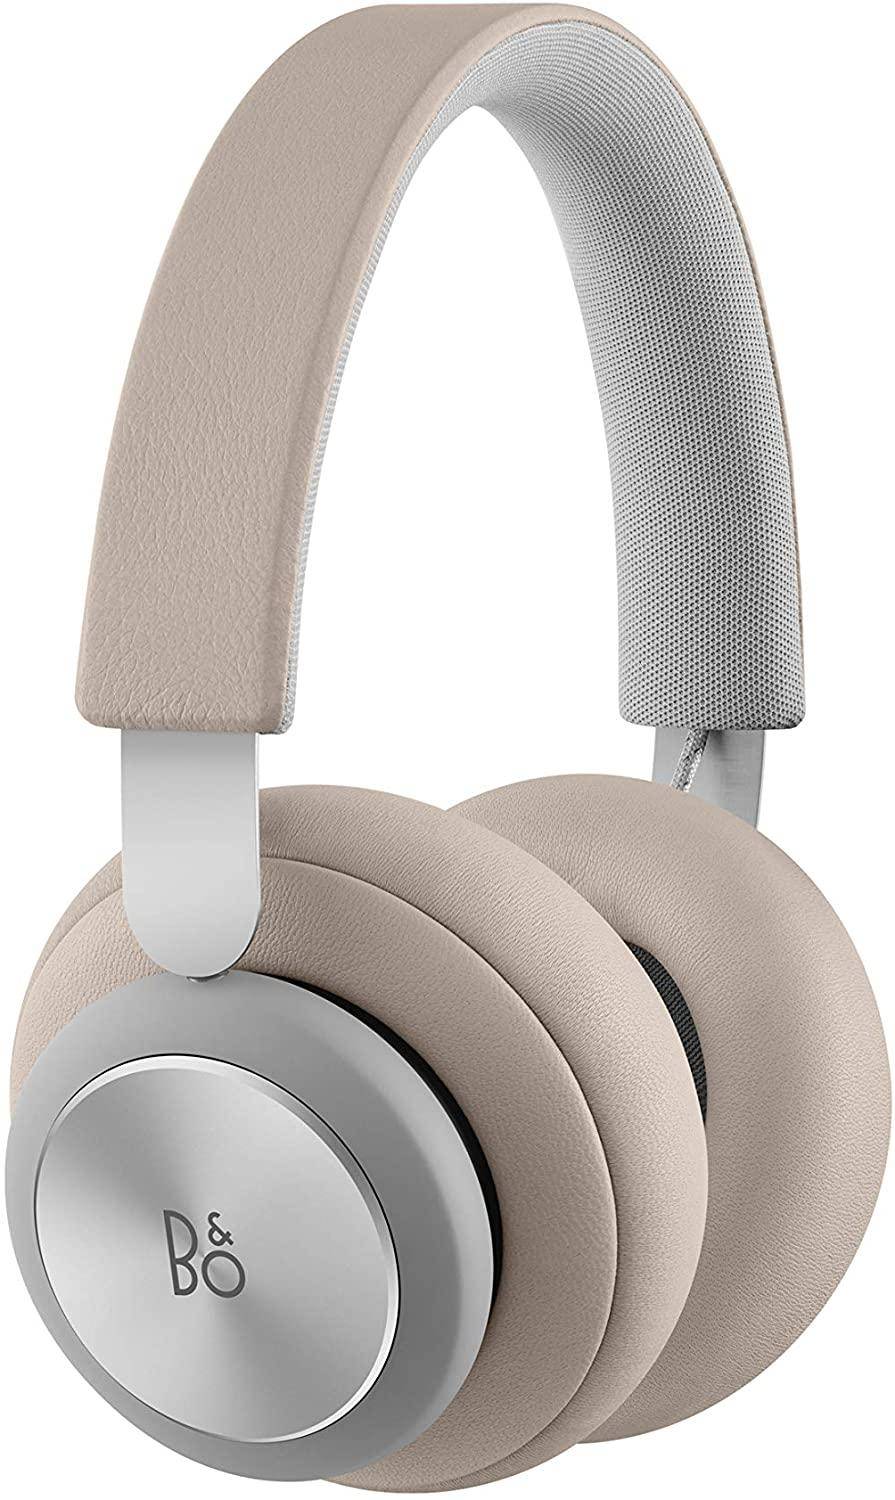 Bang & Olufsen Beoplay H4 2nd Generation Over-Ear Headphones zoom image